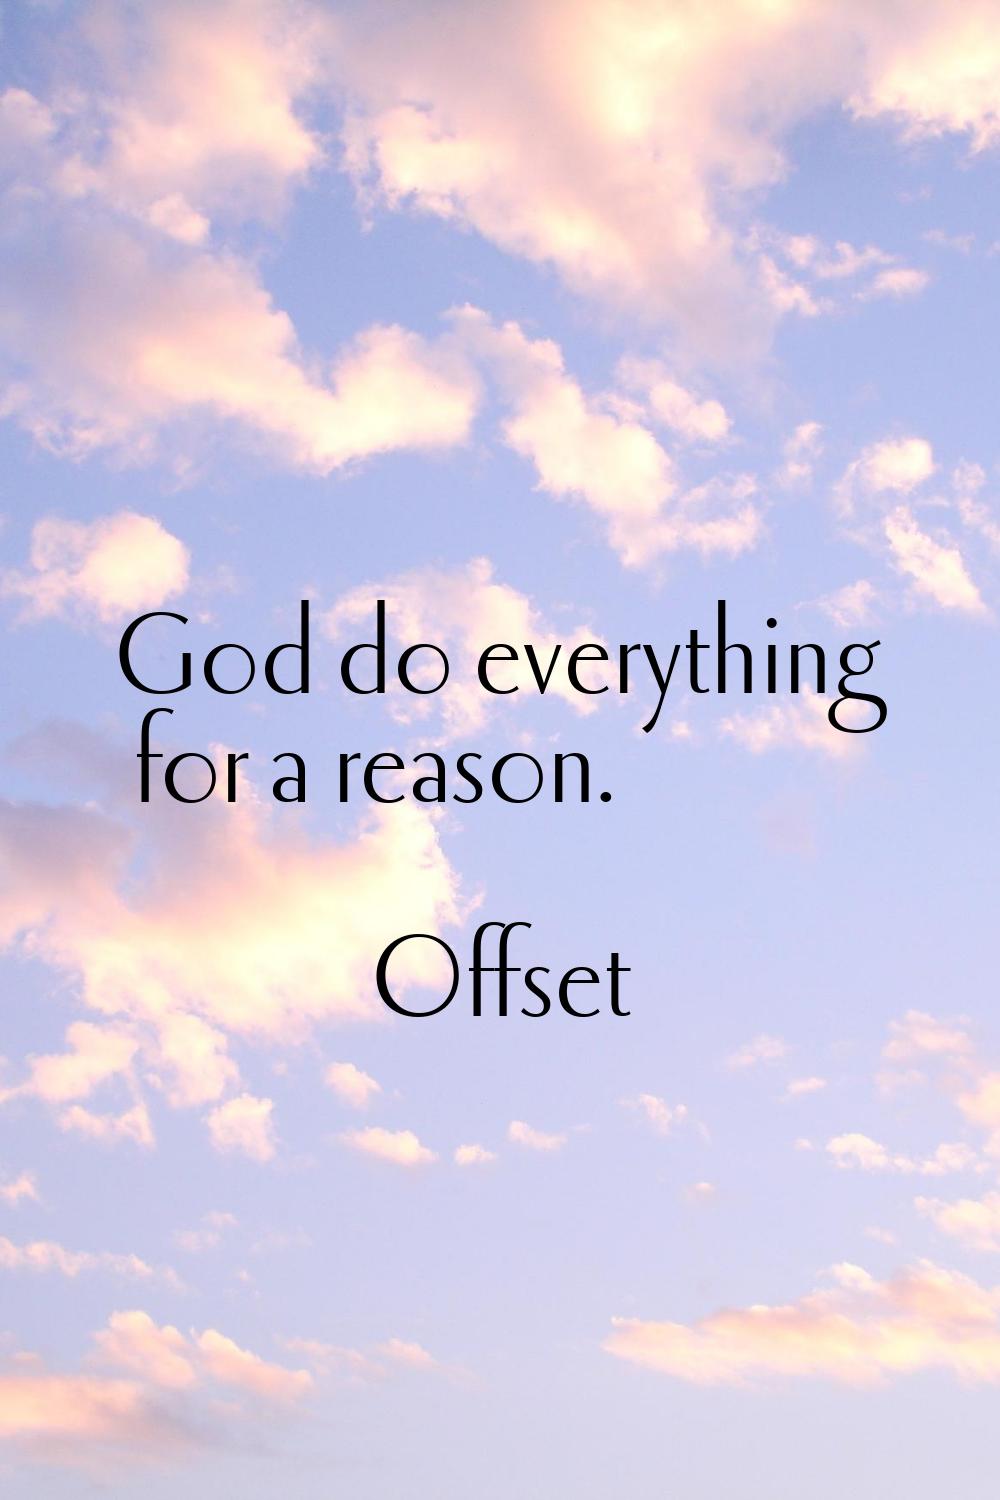 God do everything for a reason.